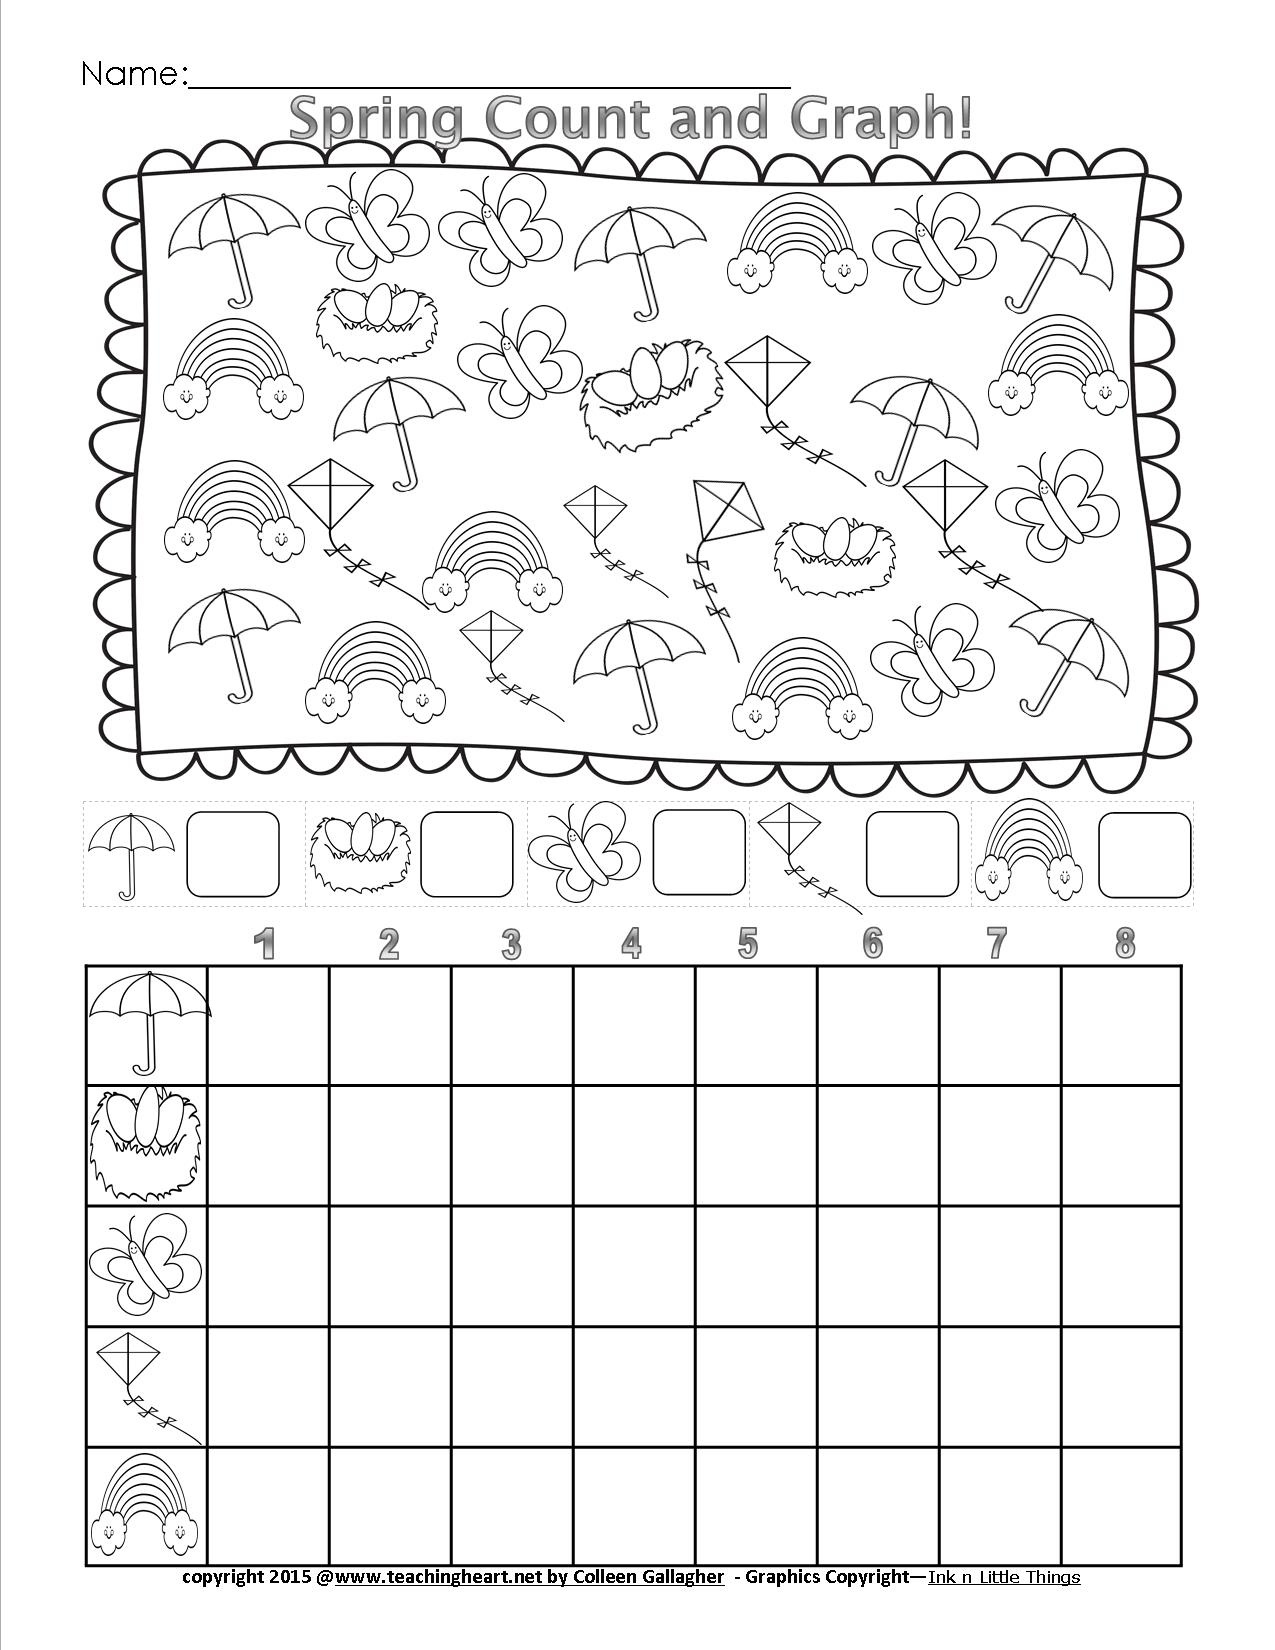 Spring Count And Graph - Free - Teaching Heart Blog Teaching Heart Blog - Free Printable Graphs For Kindergarten